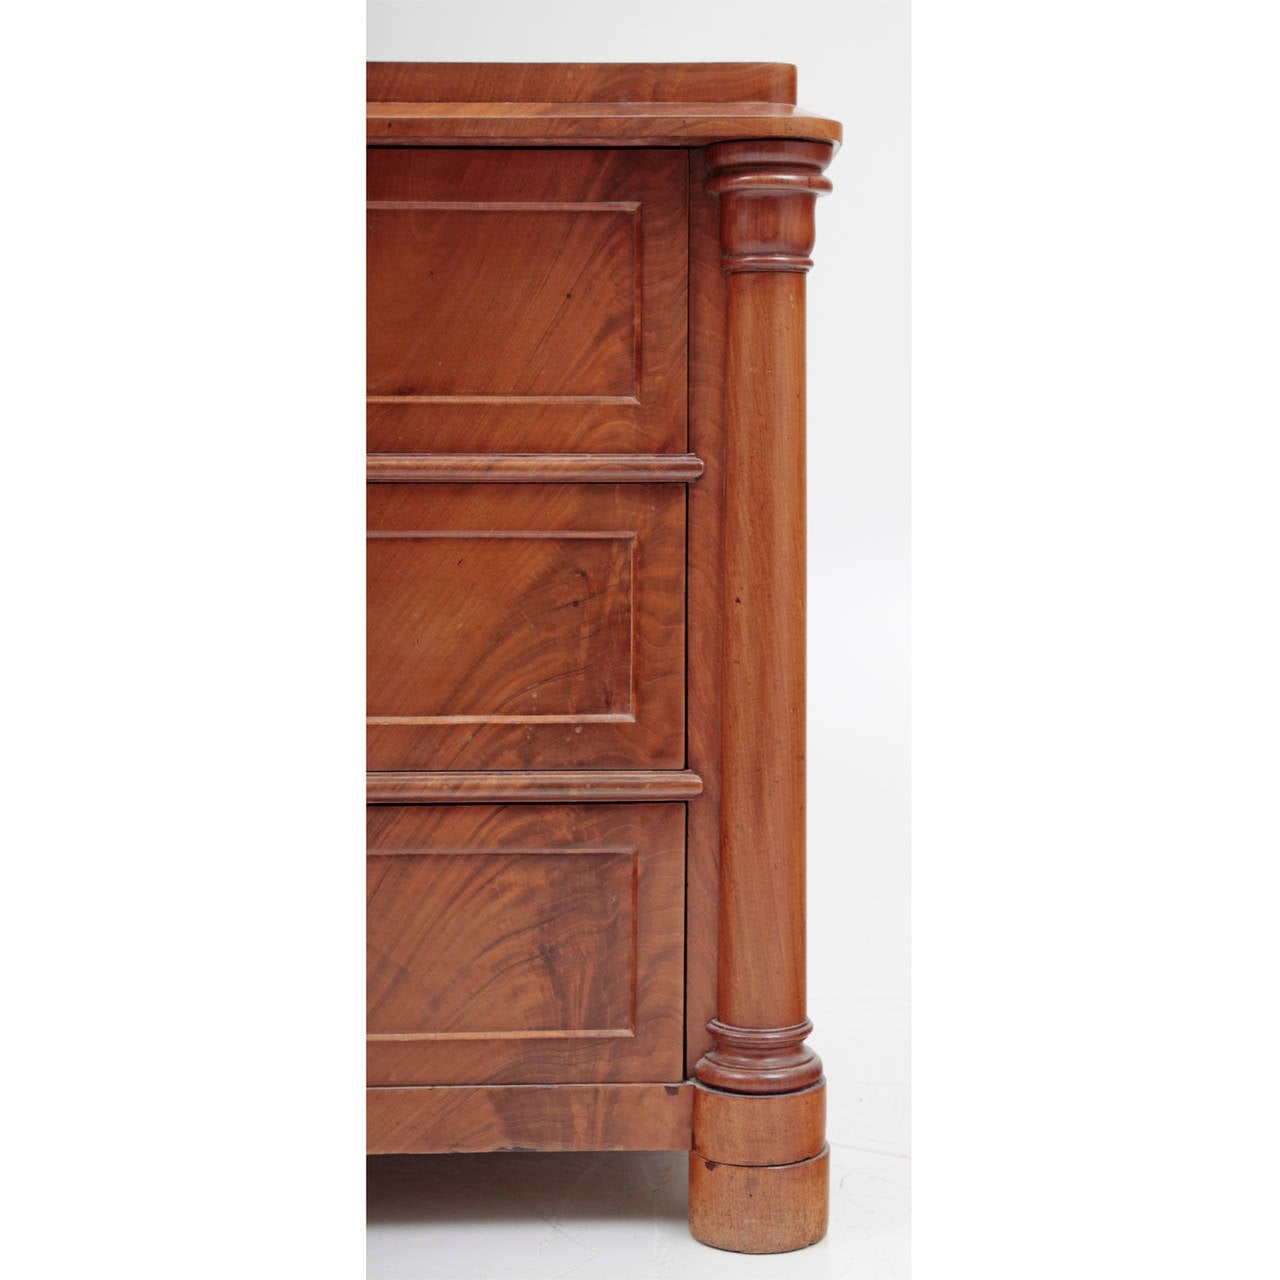 19th Century Biedermeier Chest of Drawers from 1820 / 1830.